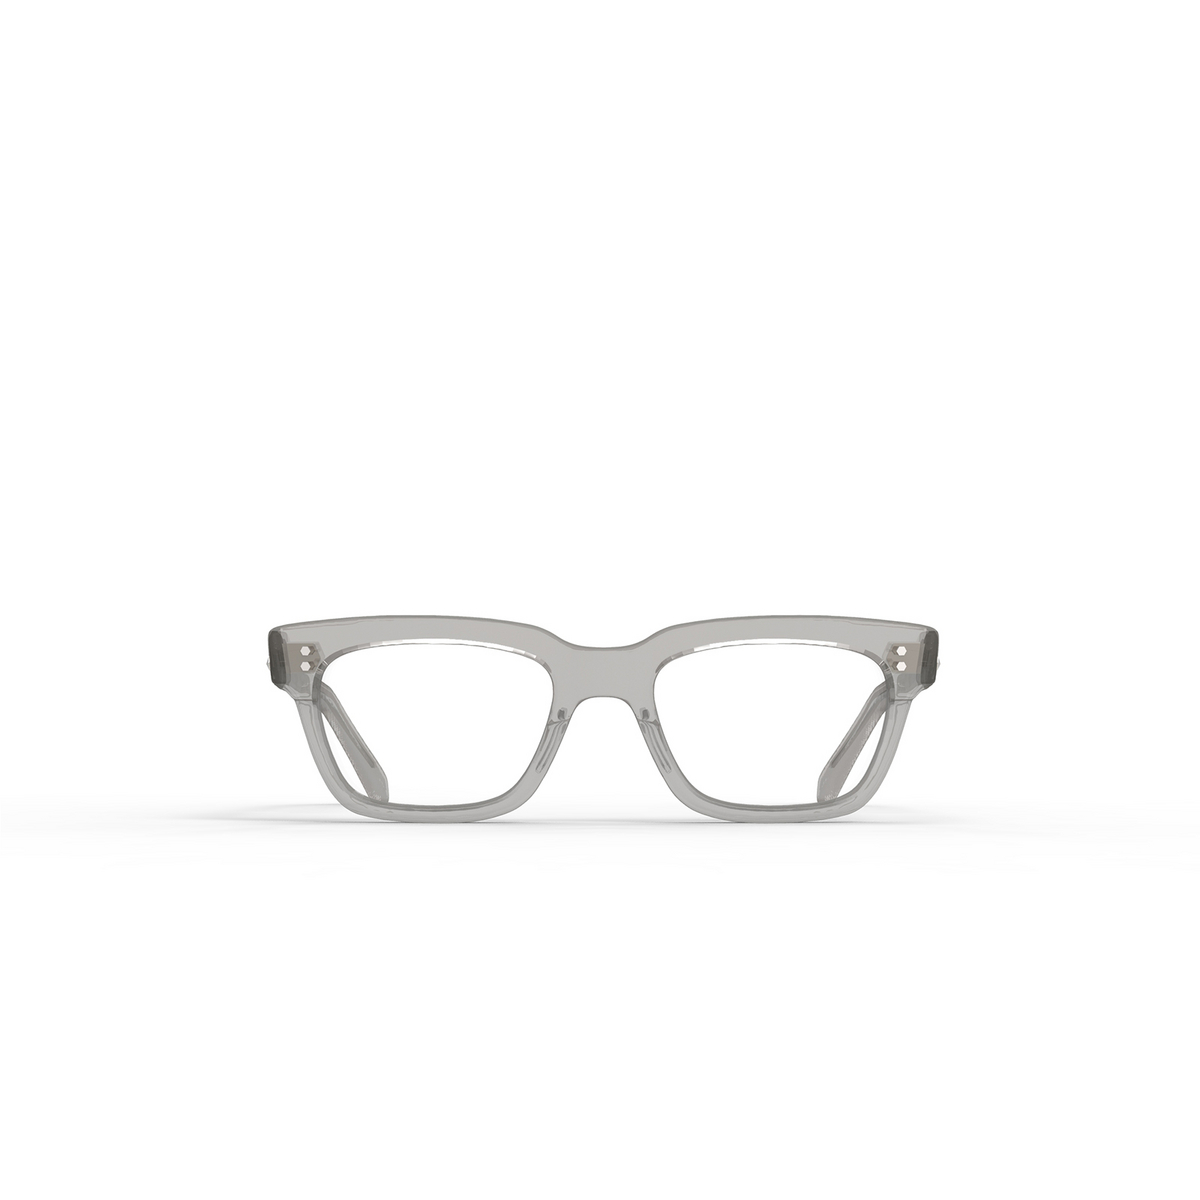 Mr. Leight ASHE C Eyeglasses GRYCRY-PLT Grey Crystal-Platinum - front view